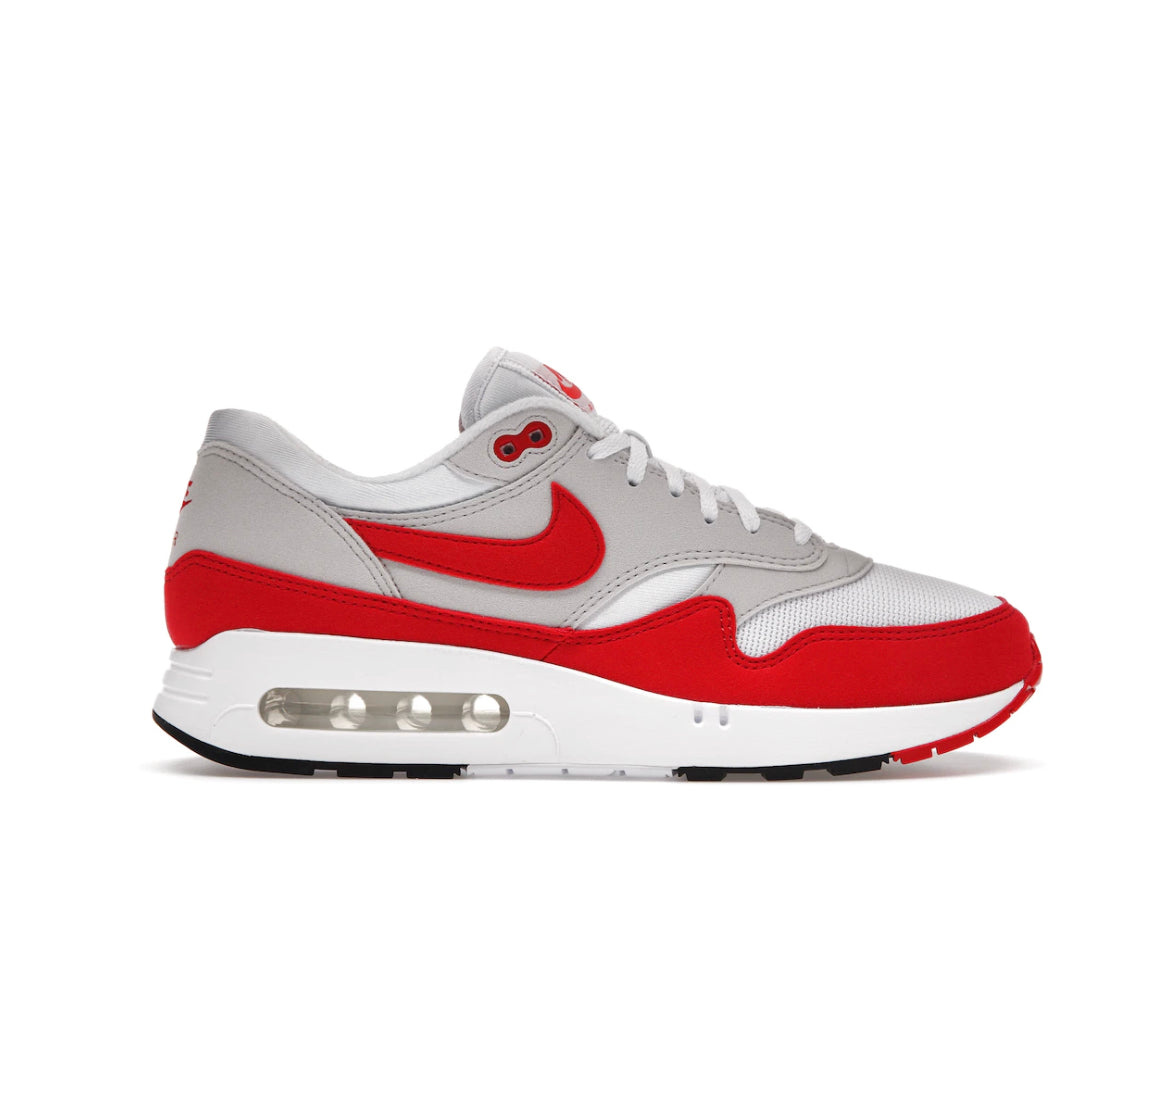 Air Max 1 ‘86 OG Big Bubble ‘Sport Red’ DQ3989-100